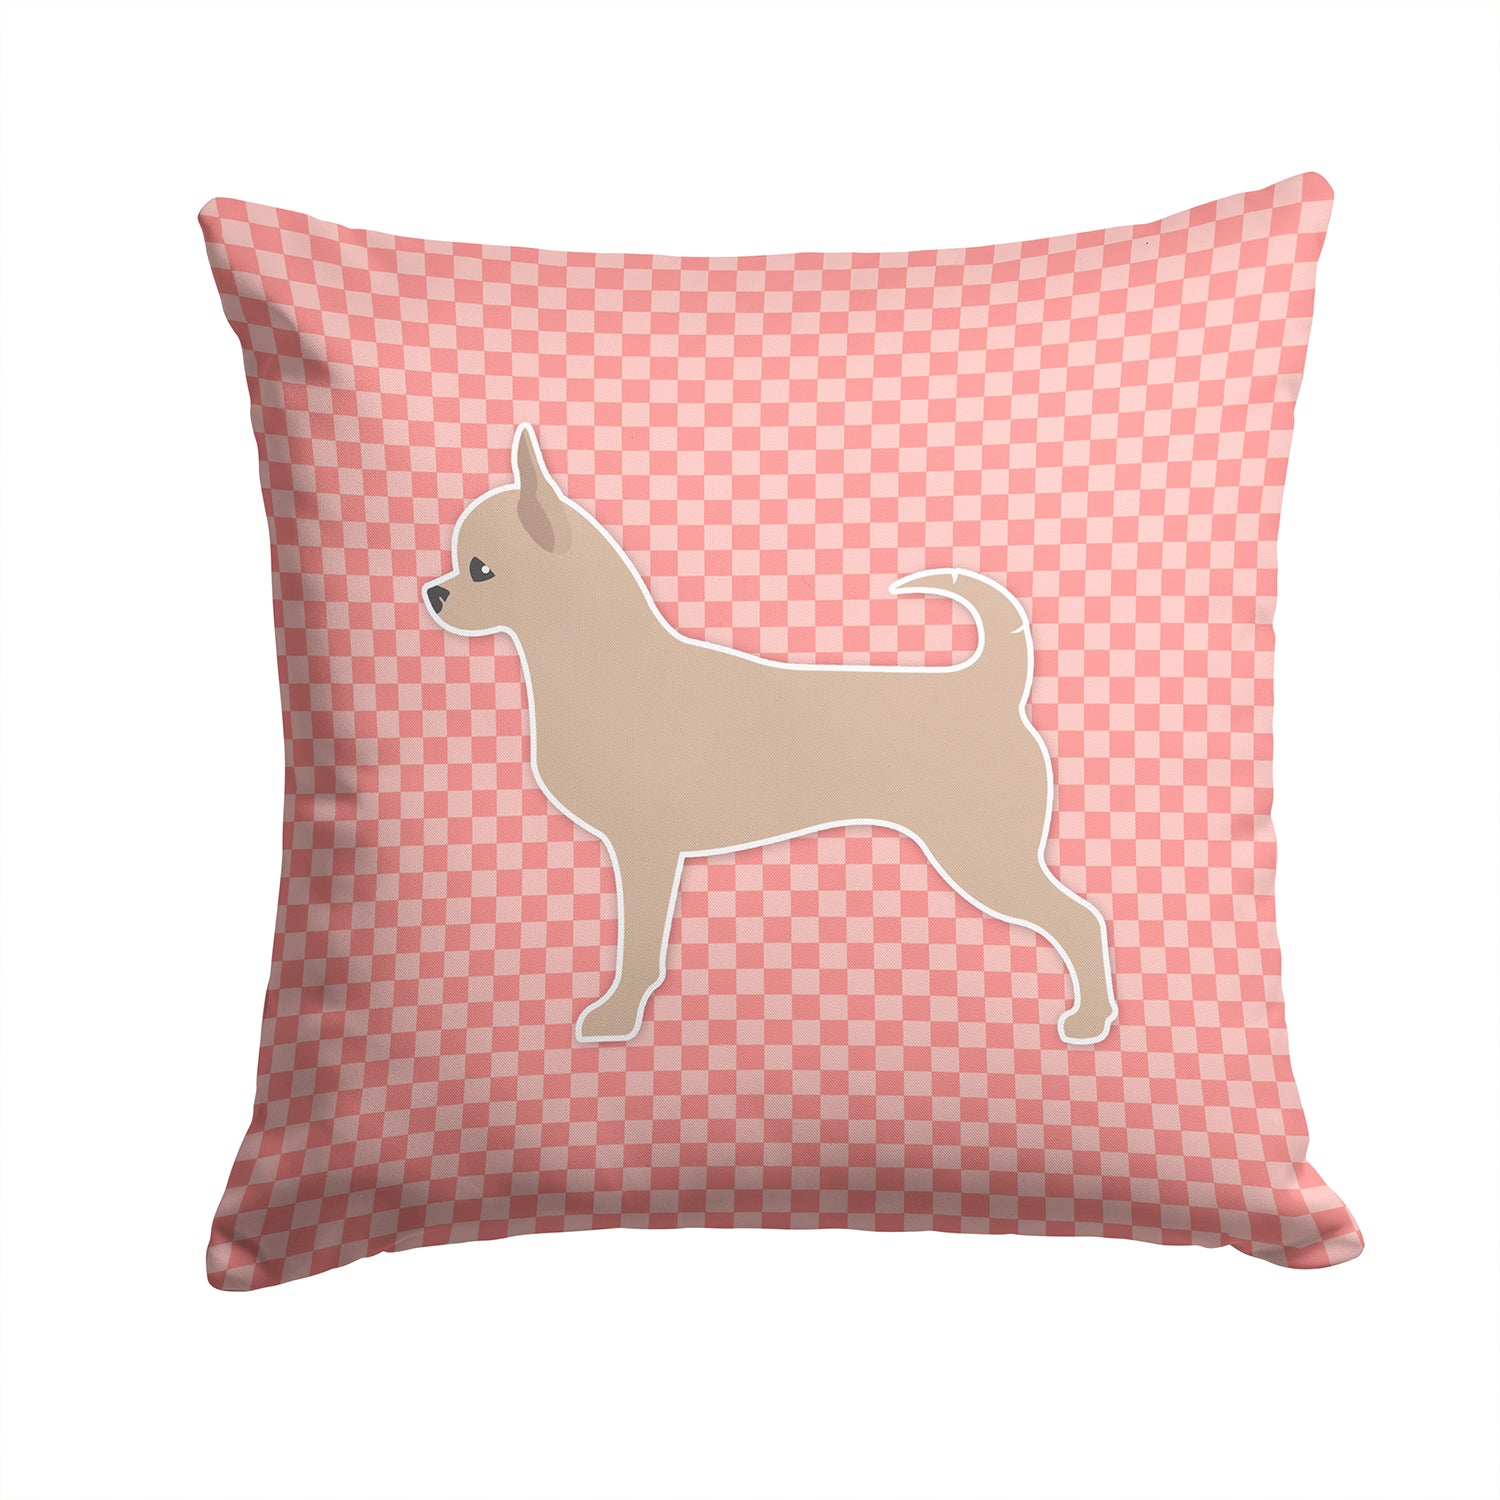 Chihuahua Checkerboard Pink Fabric Decorative Pillow BB3650PW1414 - the-store.com